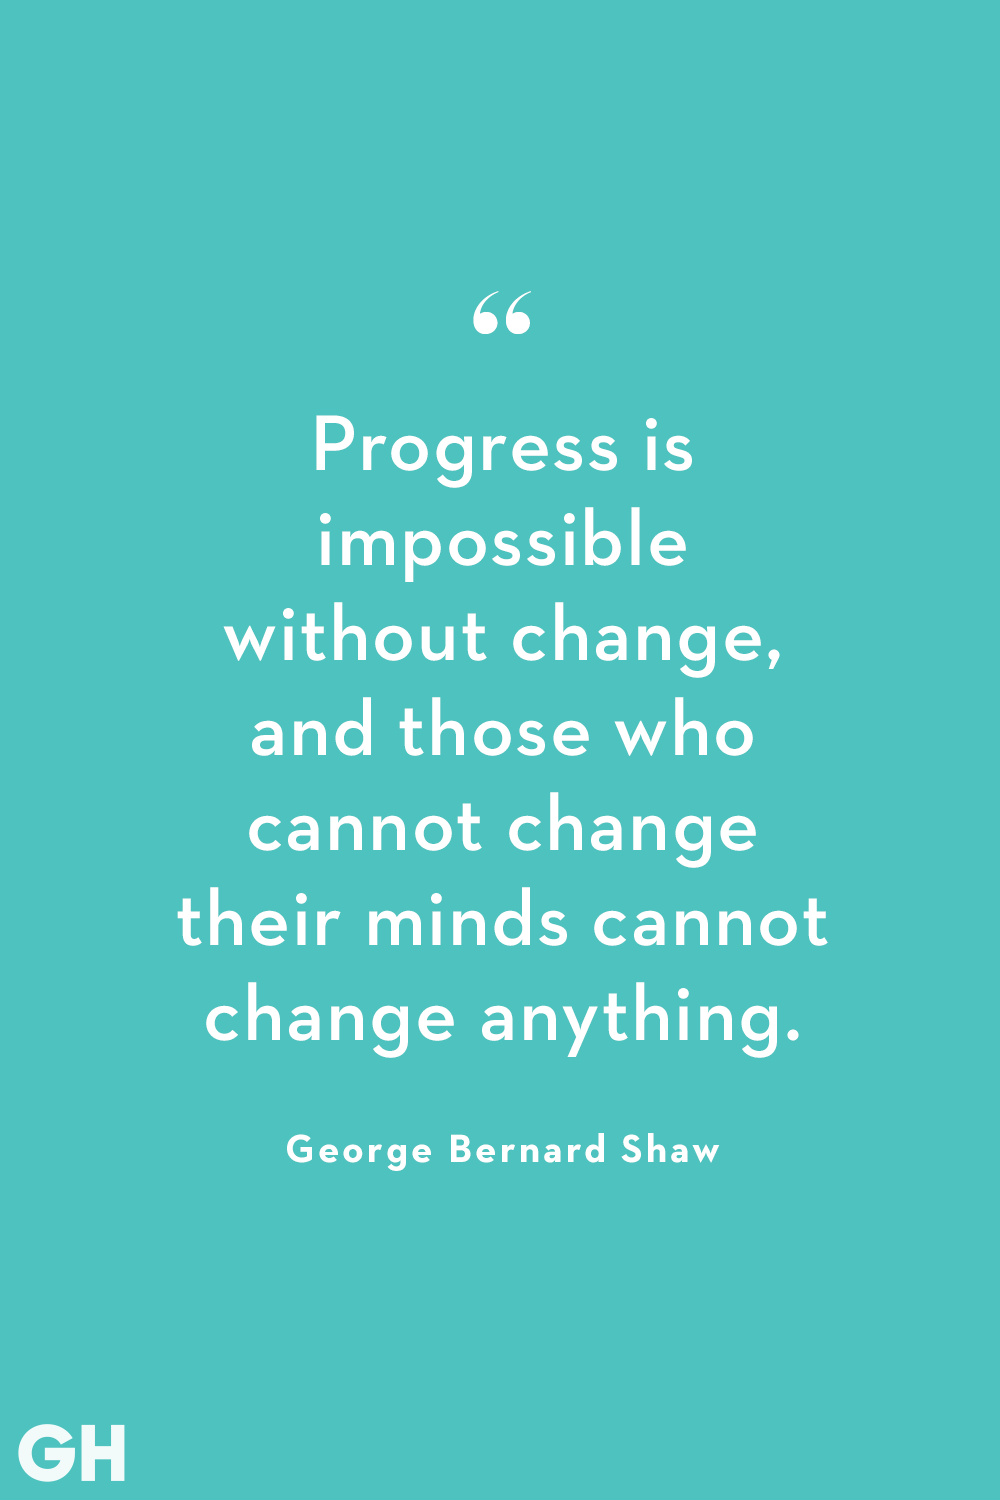 business quotes about change